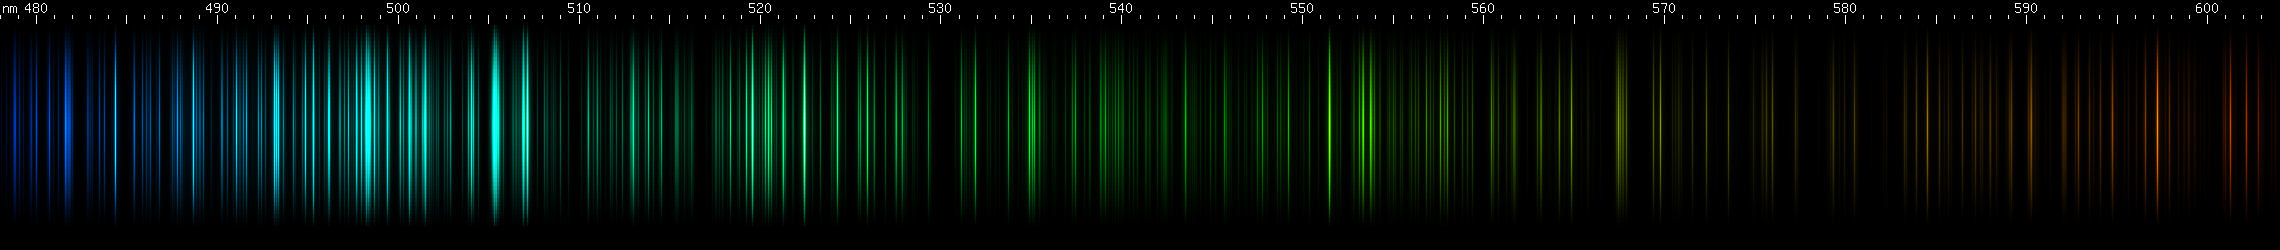 Spectral lines of Tungsten.